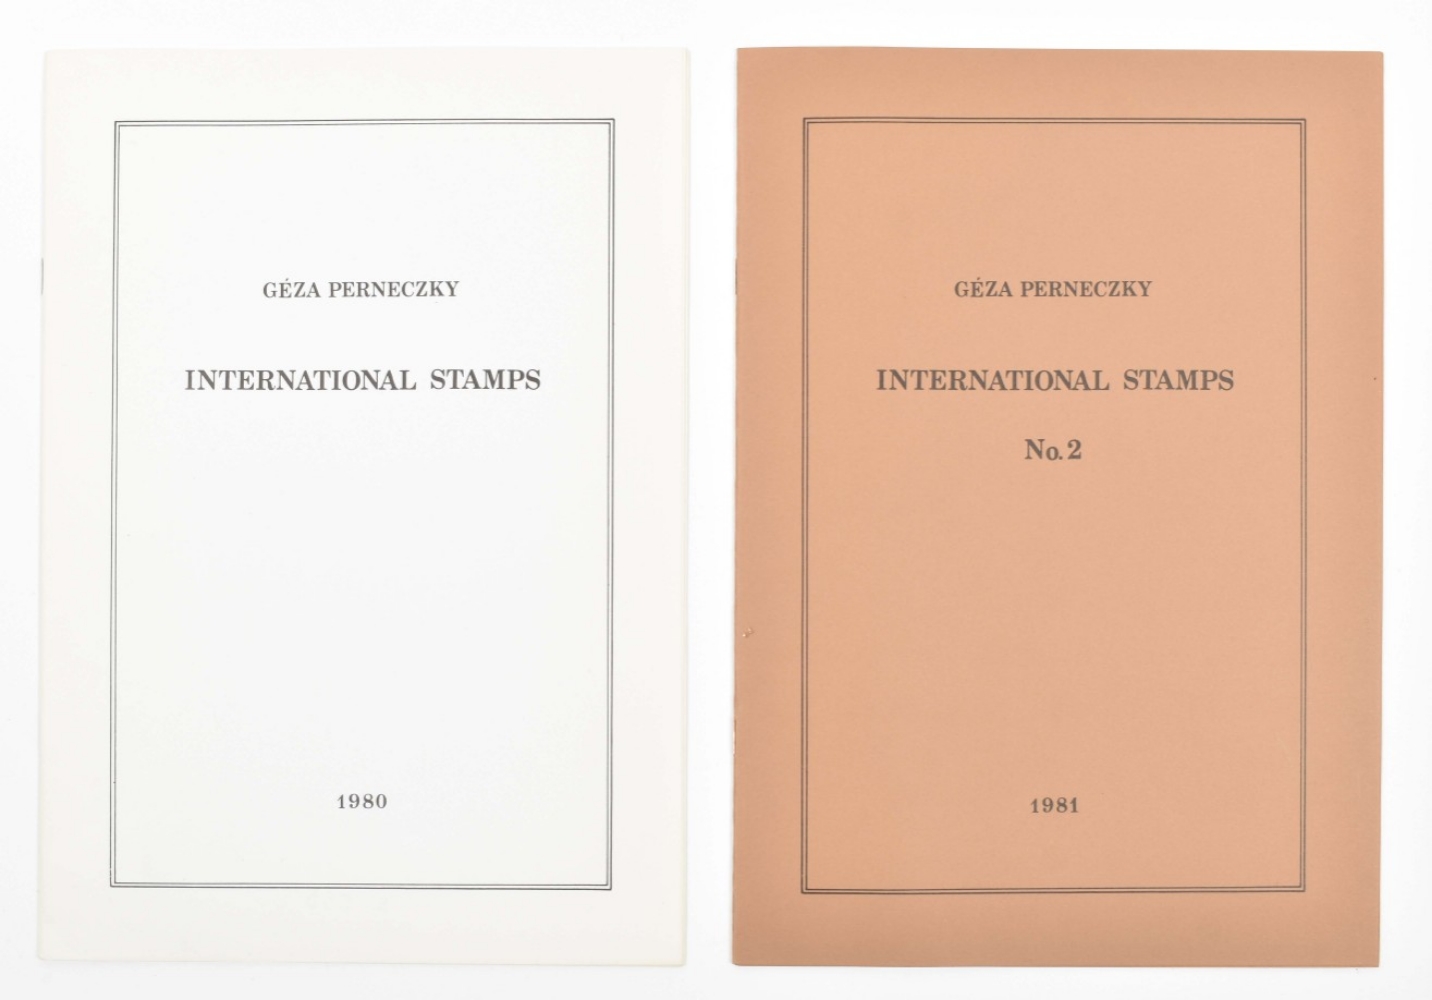 Geza Perneczky, Post Infinite and International Stamps No.1 and No.2 - Image 4 of 10